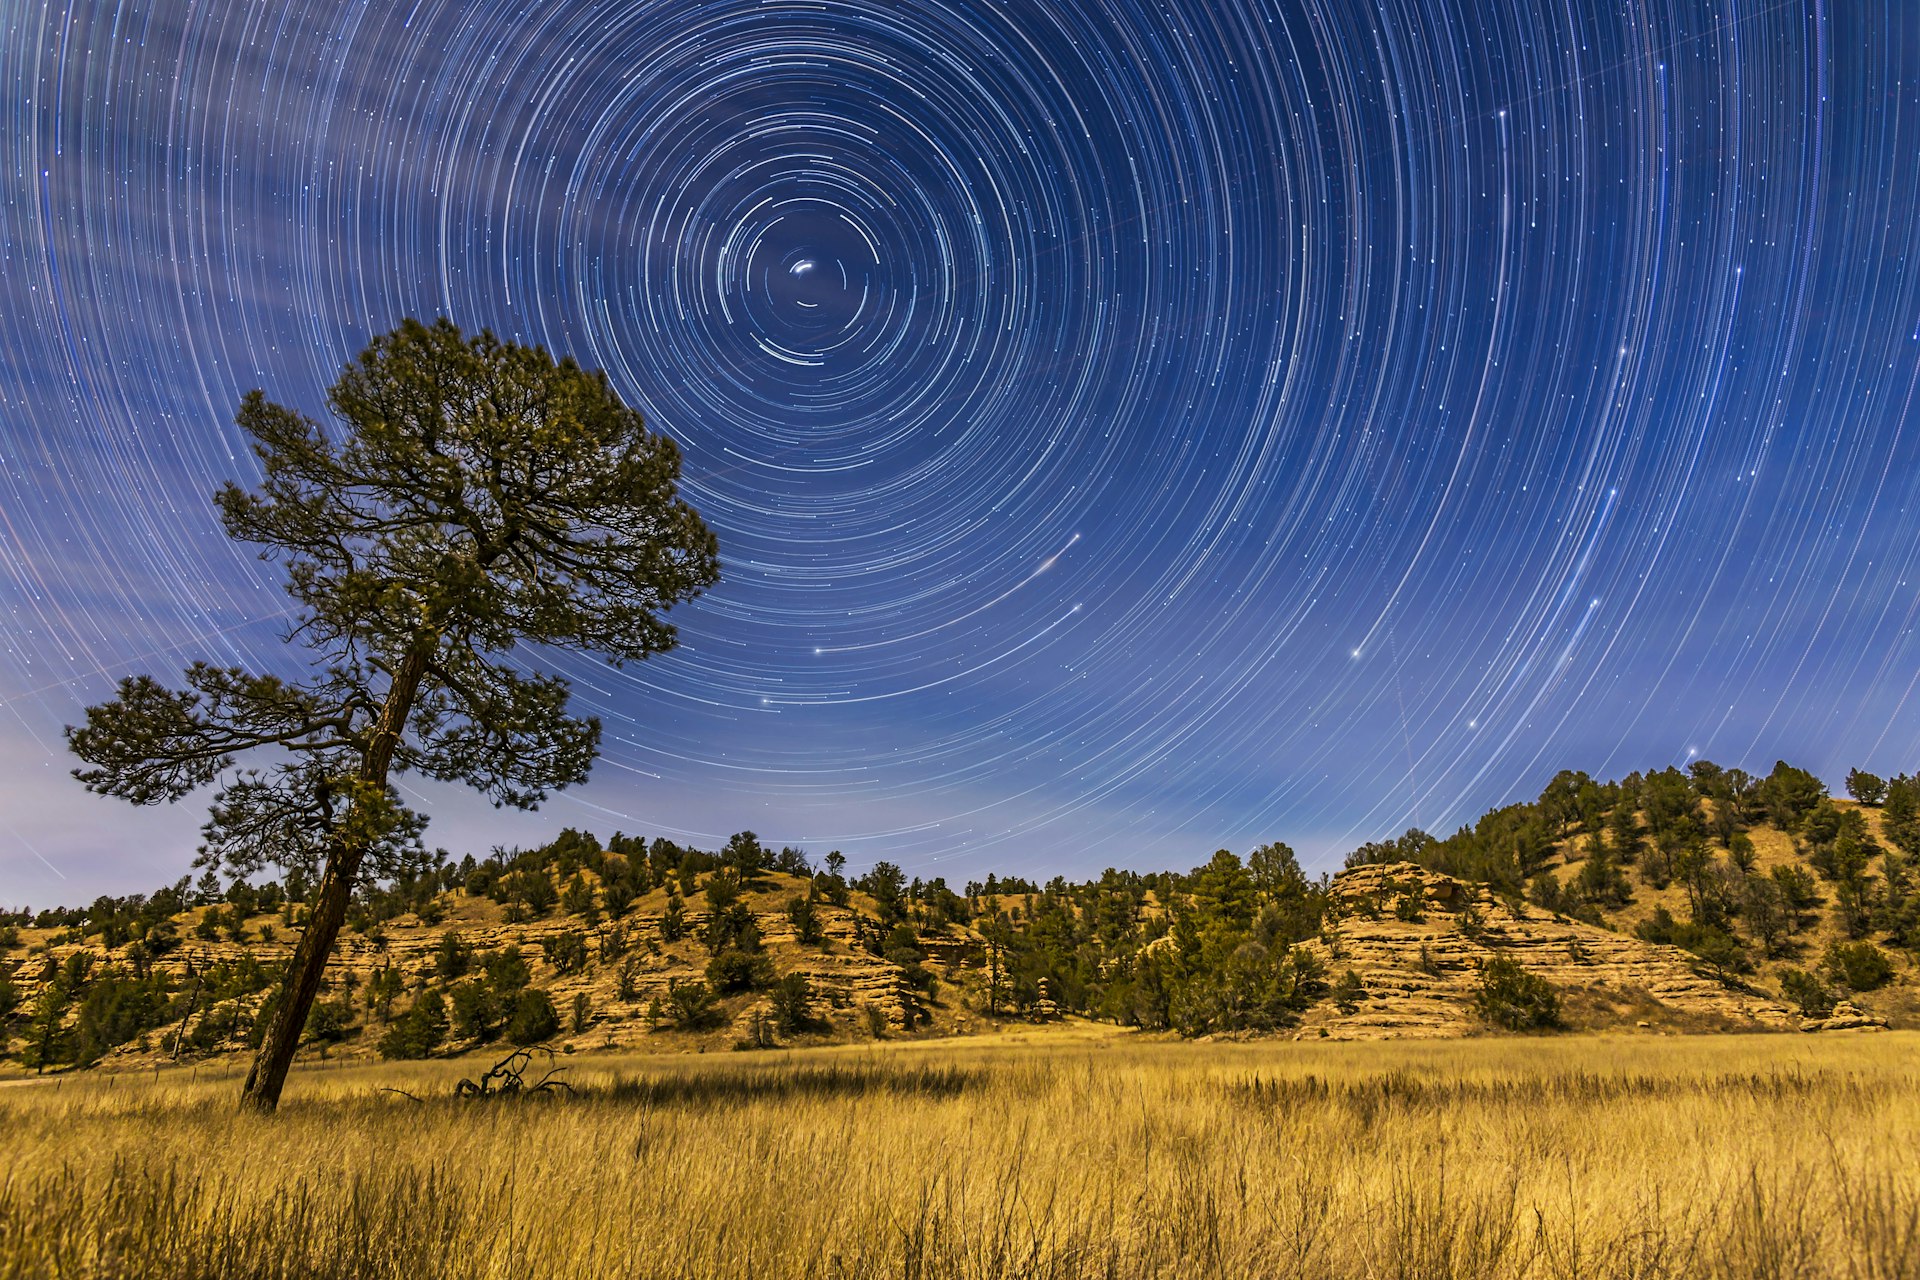 A long exposure showing star trails over a desert landscape at night